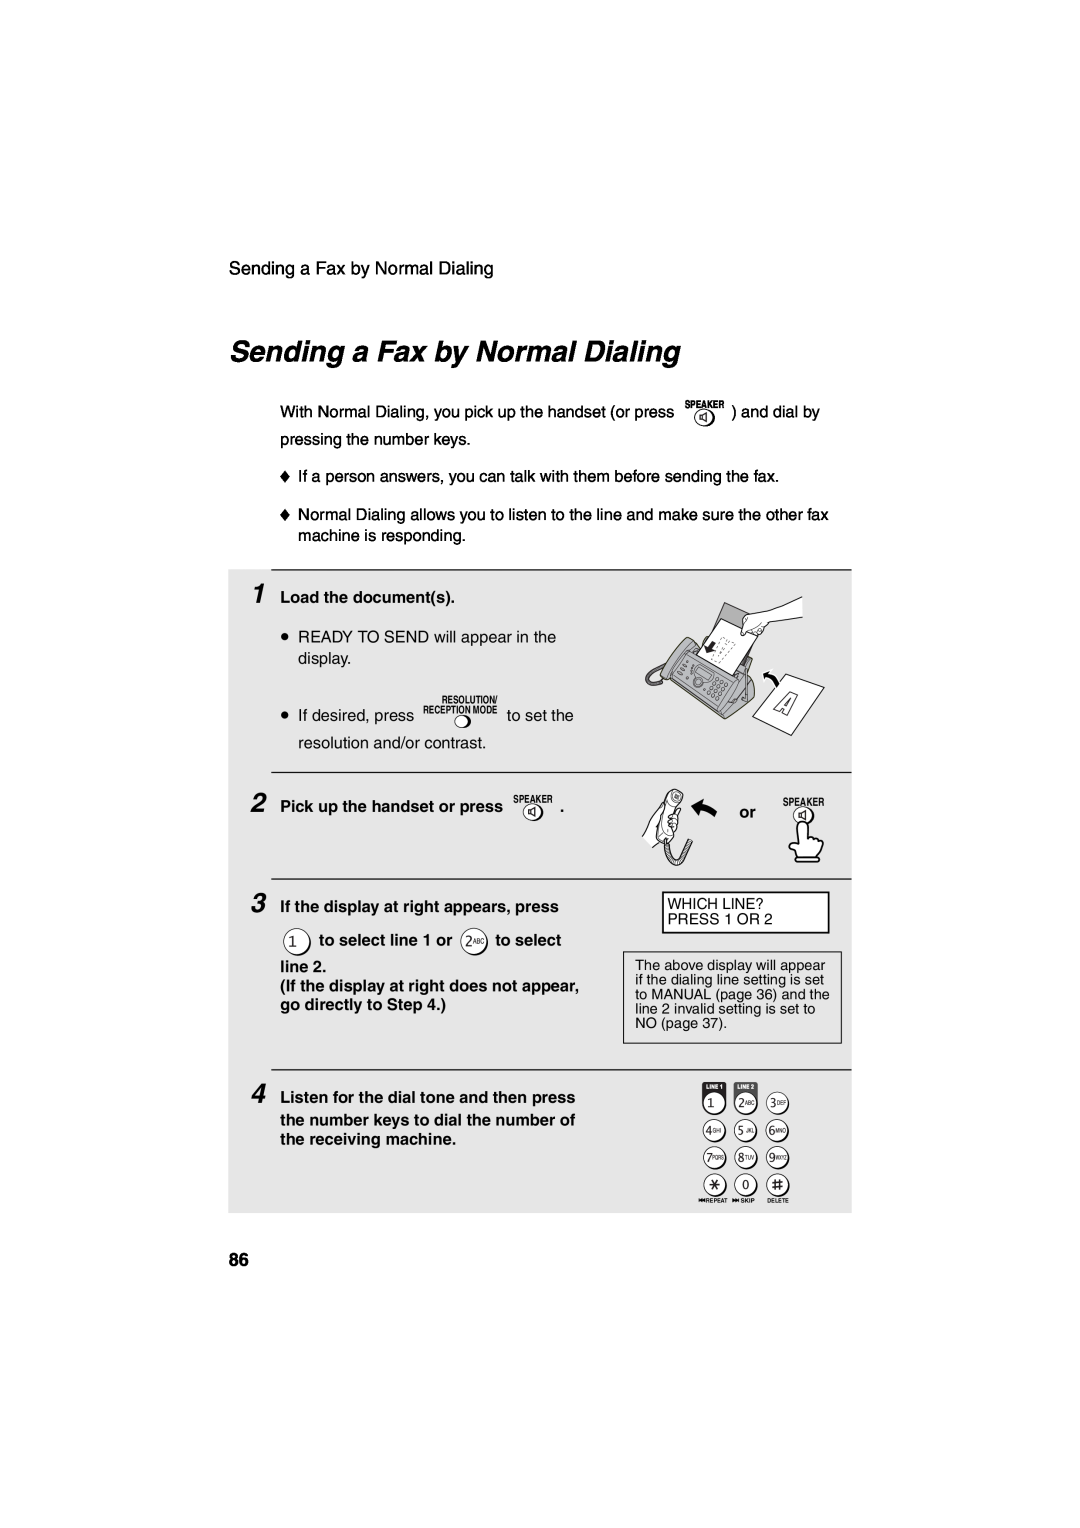 Sharp UX-CD600 operation manual Sending a Fax by Normal Dialing 